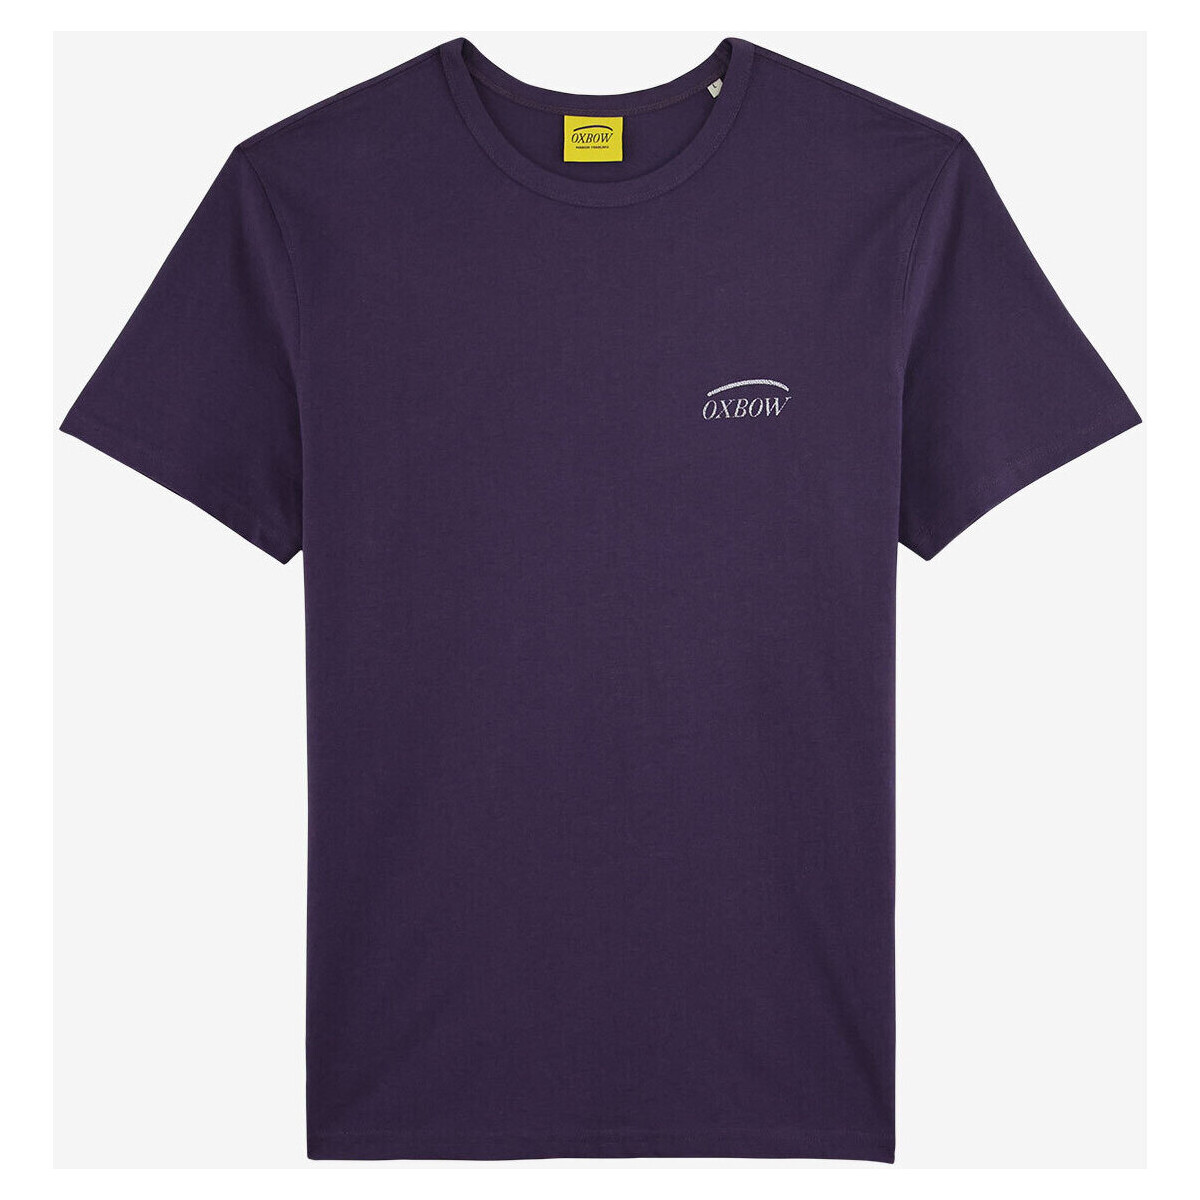 Oxbow Violet Tee-shirt manches courtes imprimé P2THONY 